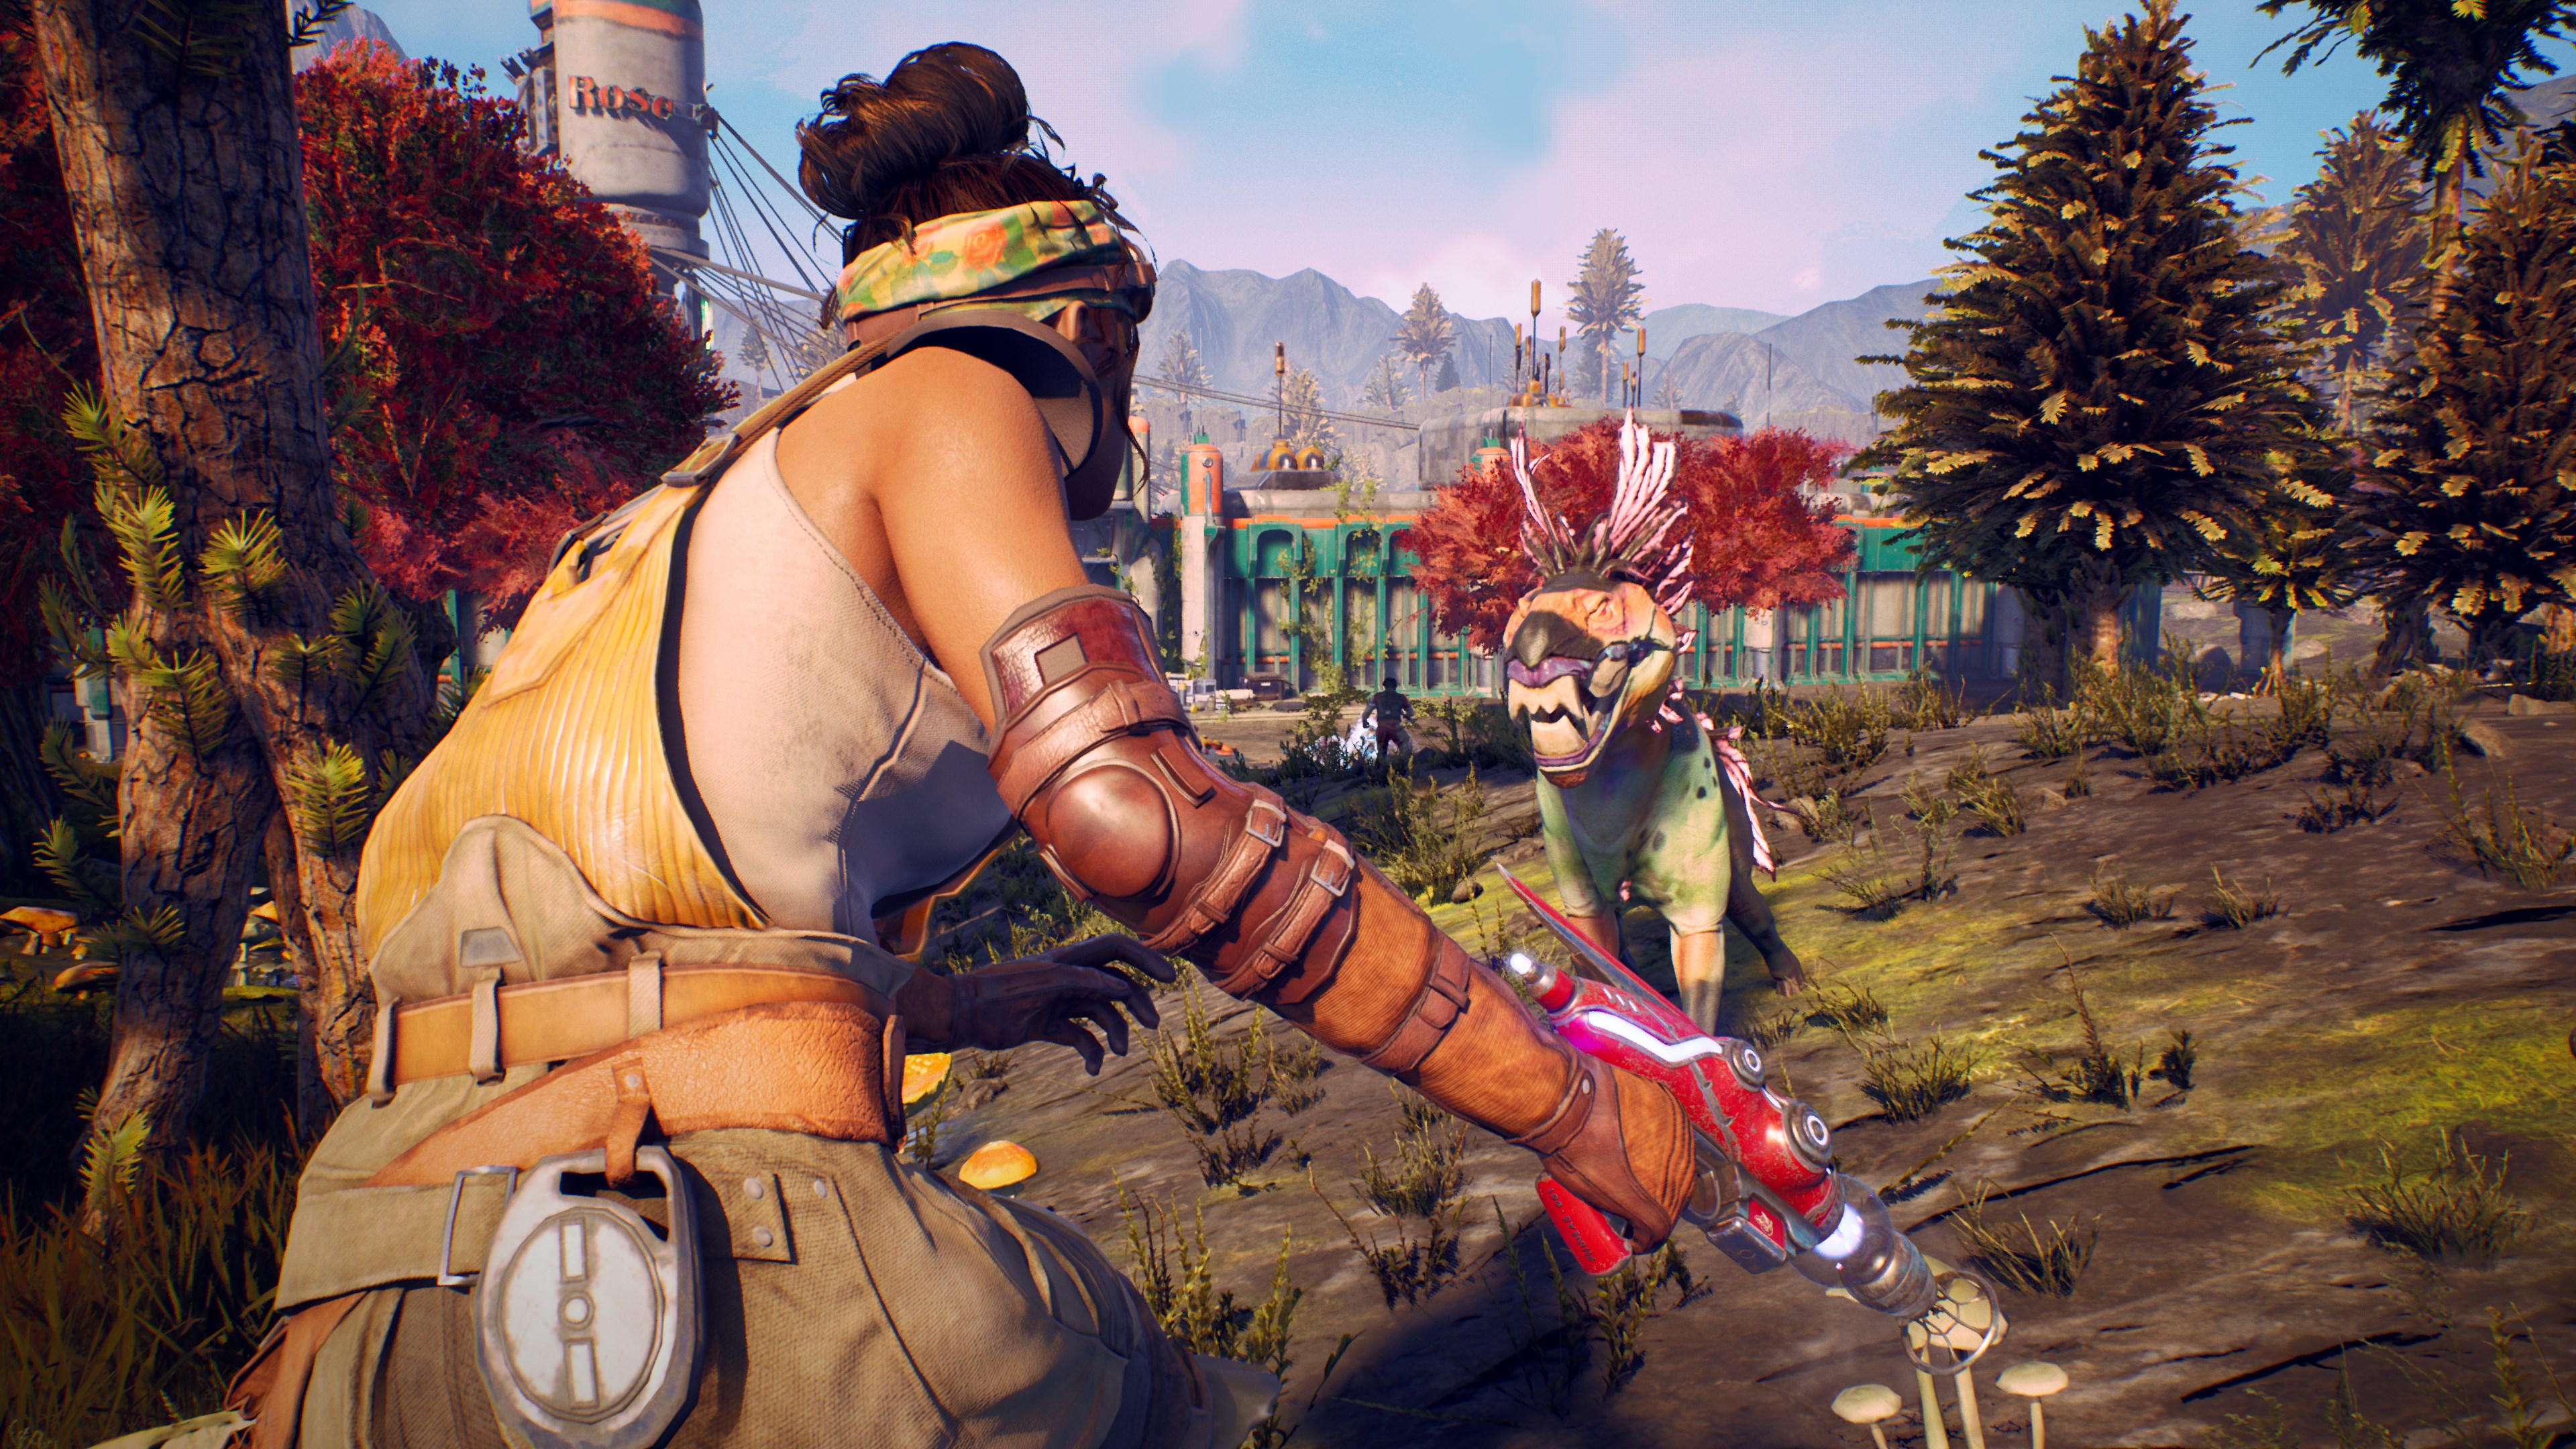 outer worlds xbox one